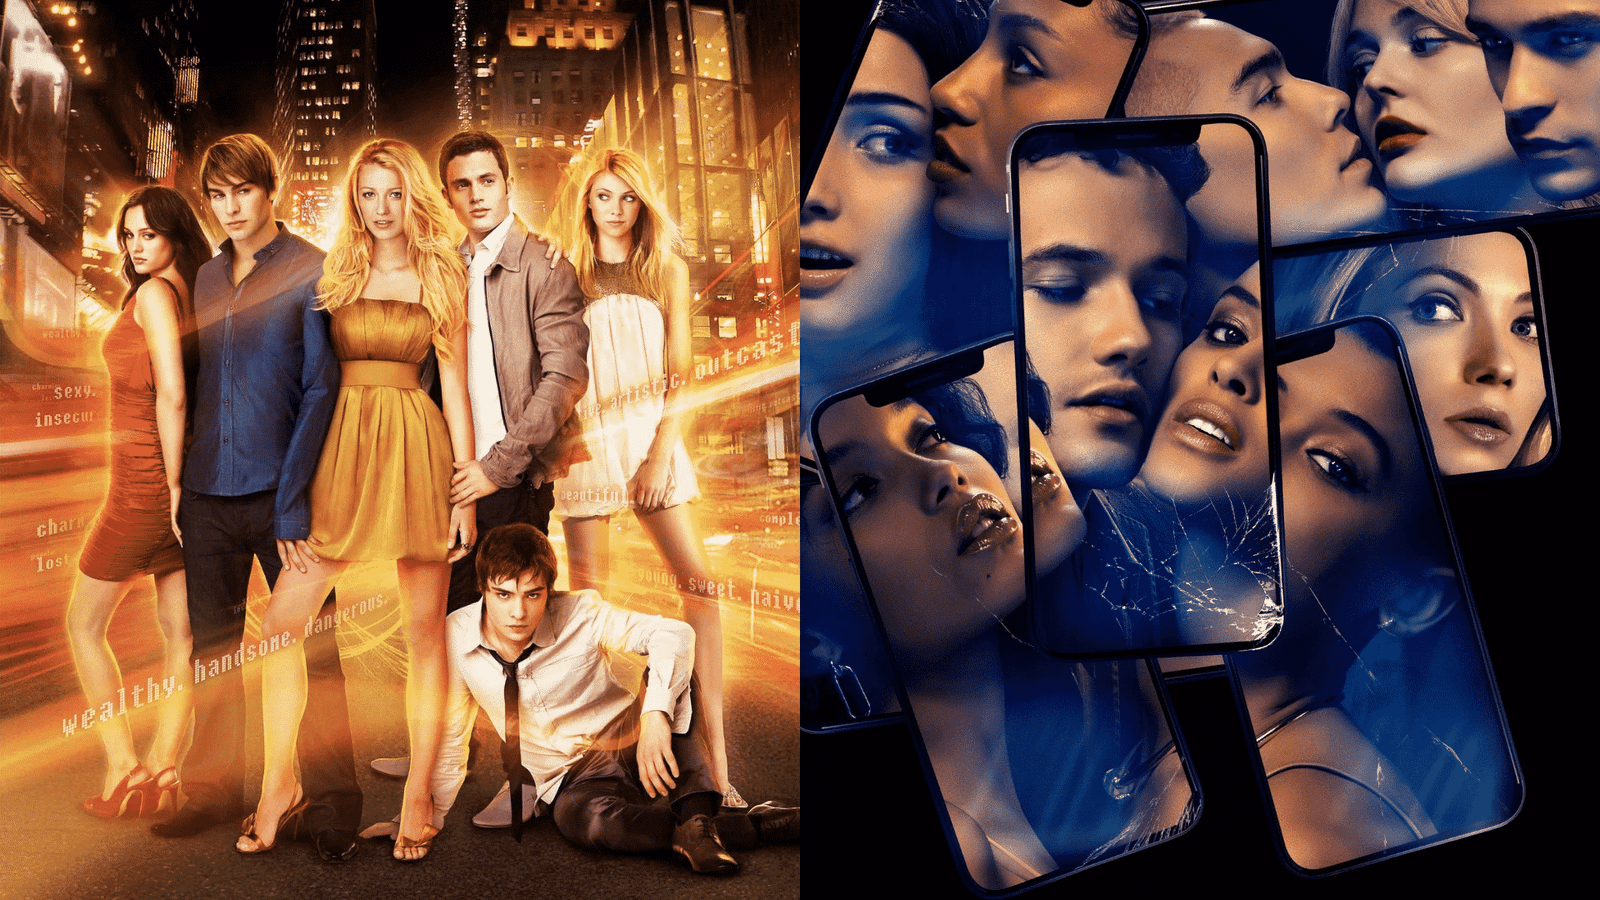 Differences between the Original Gossip Girl and the reboot